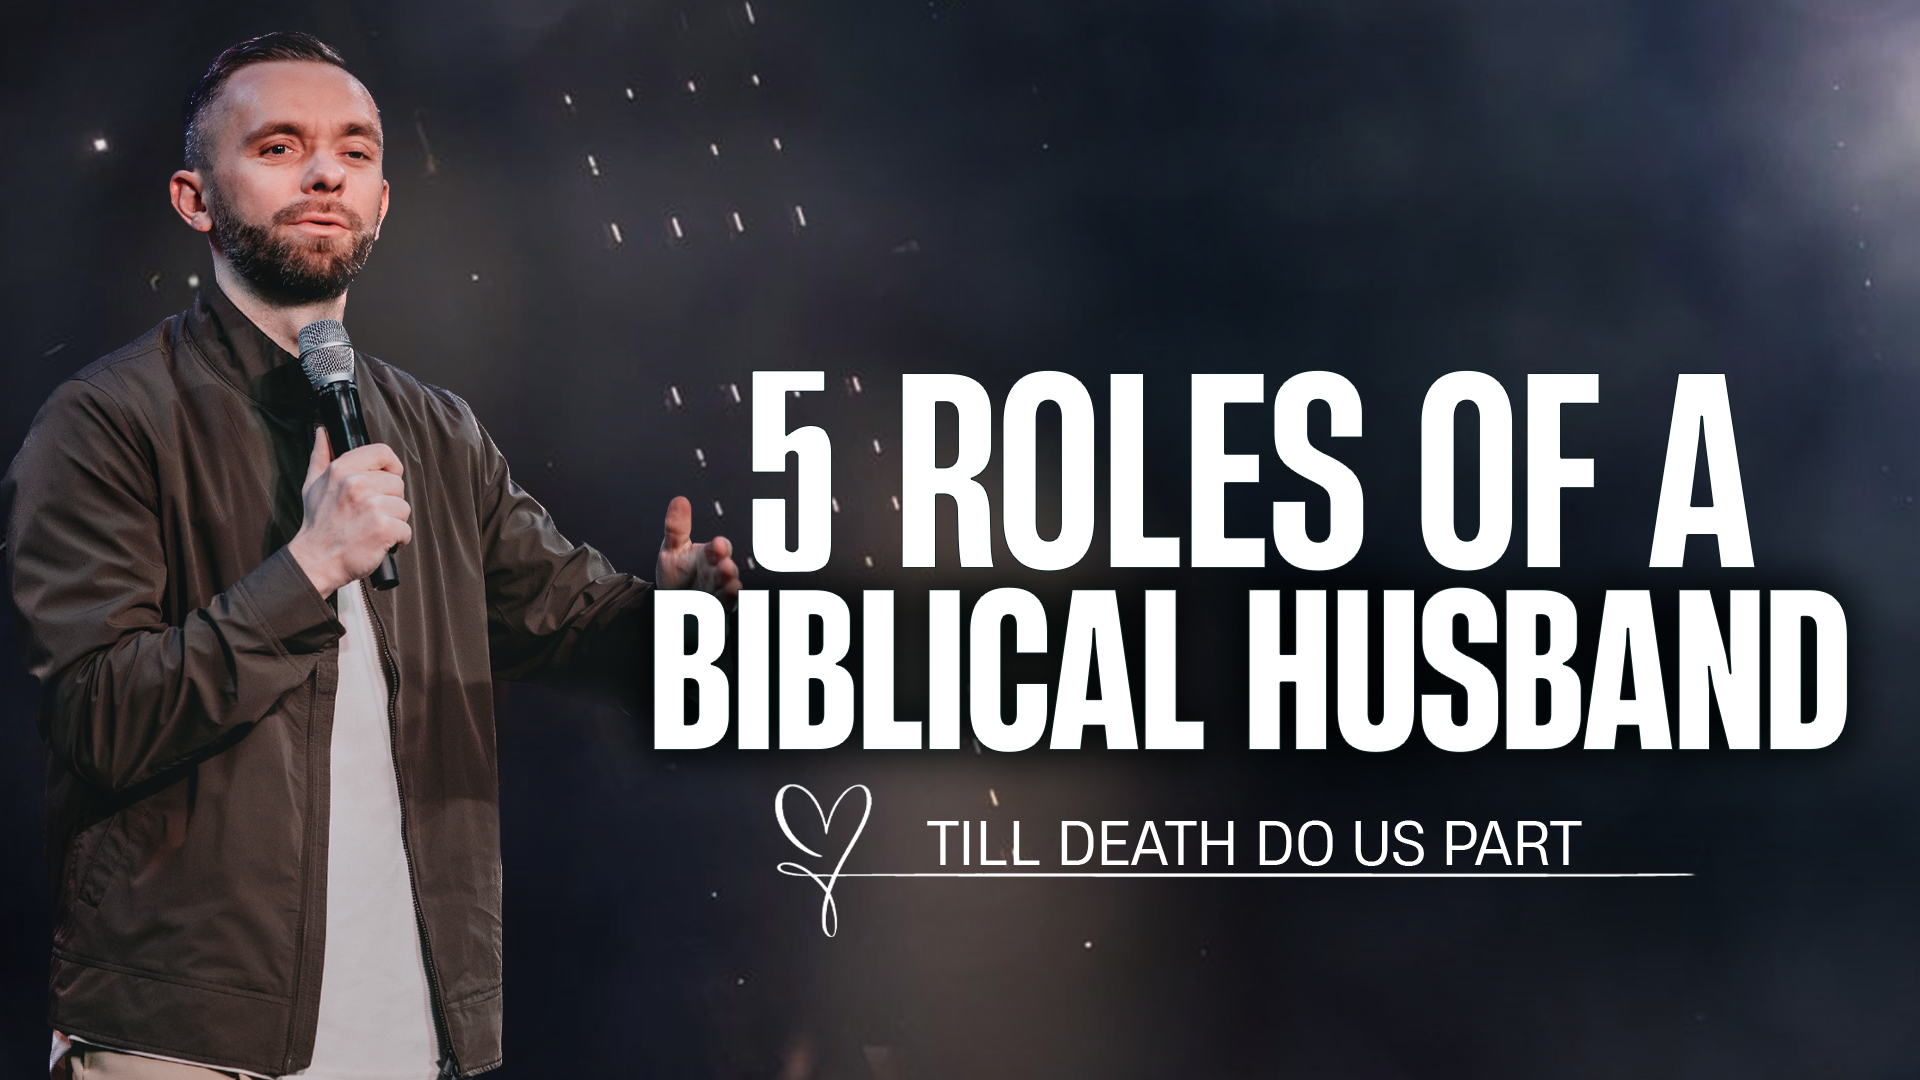 Featured Image for “5 Roles of A Biblical Husband”